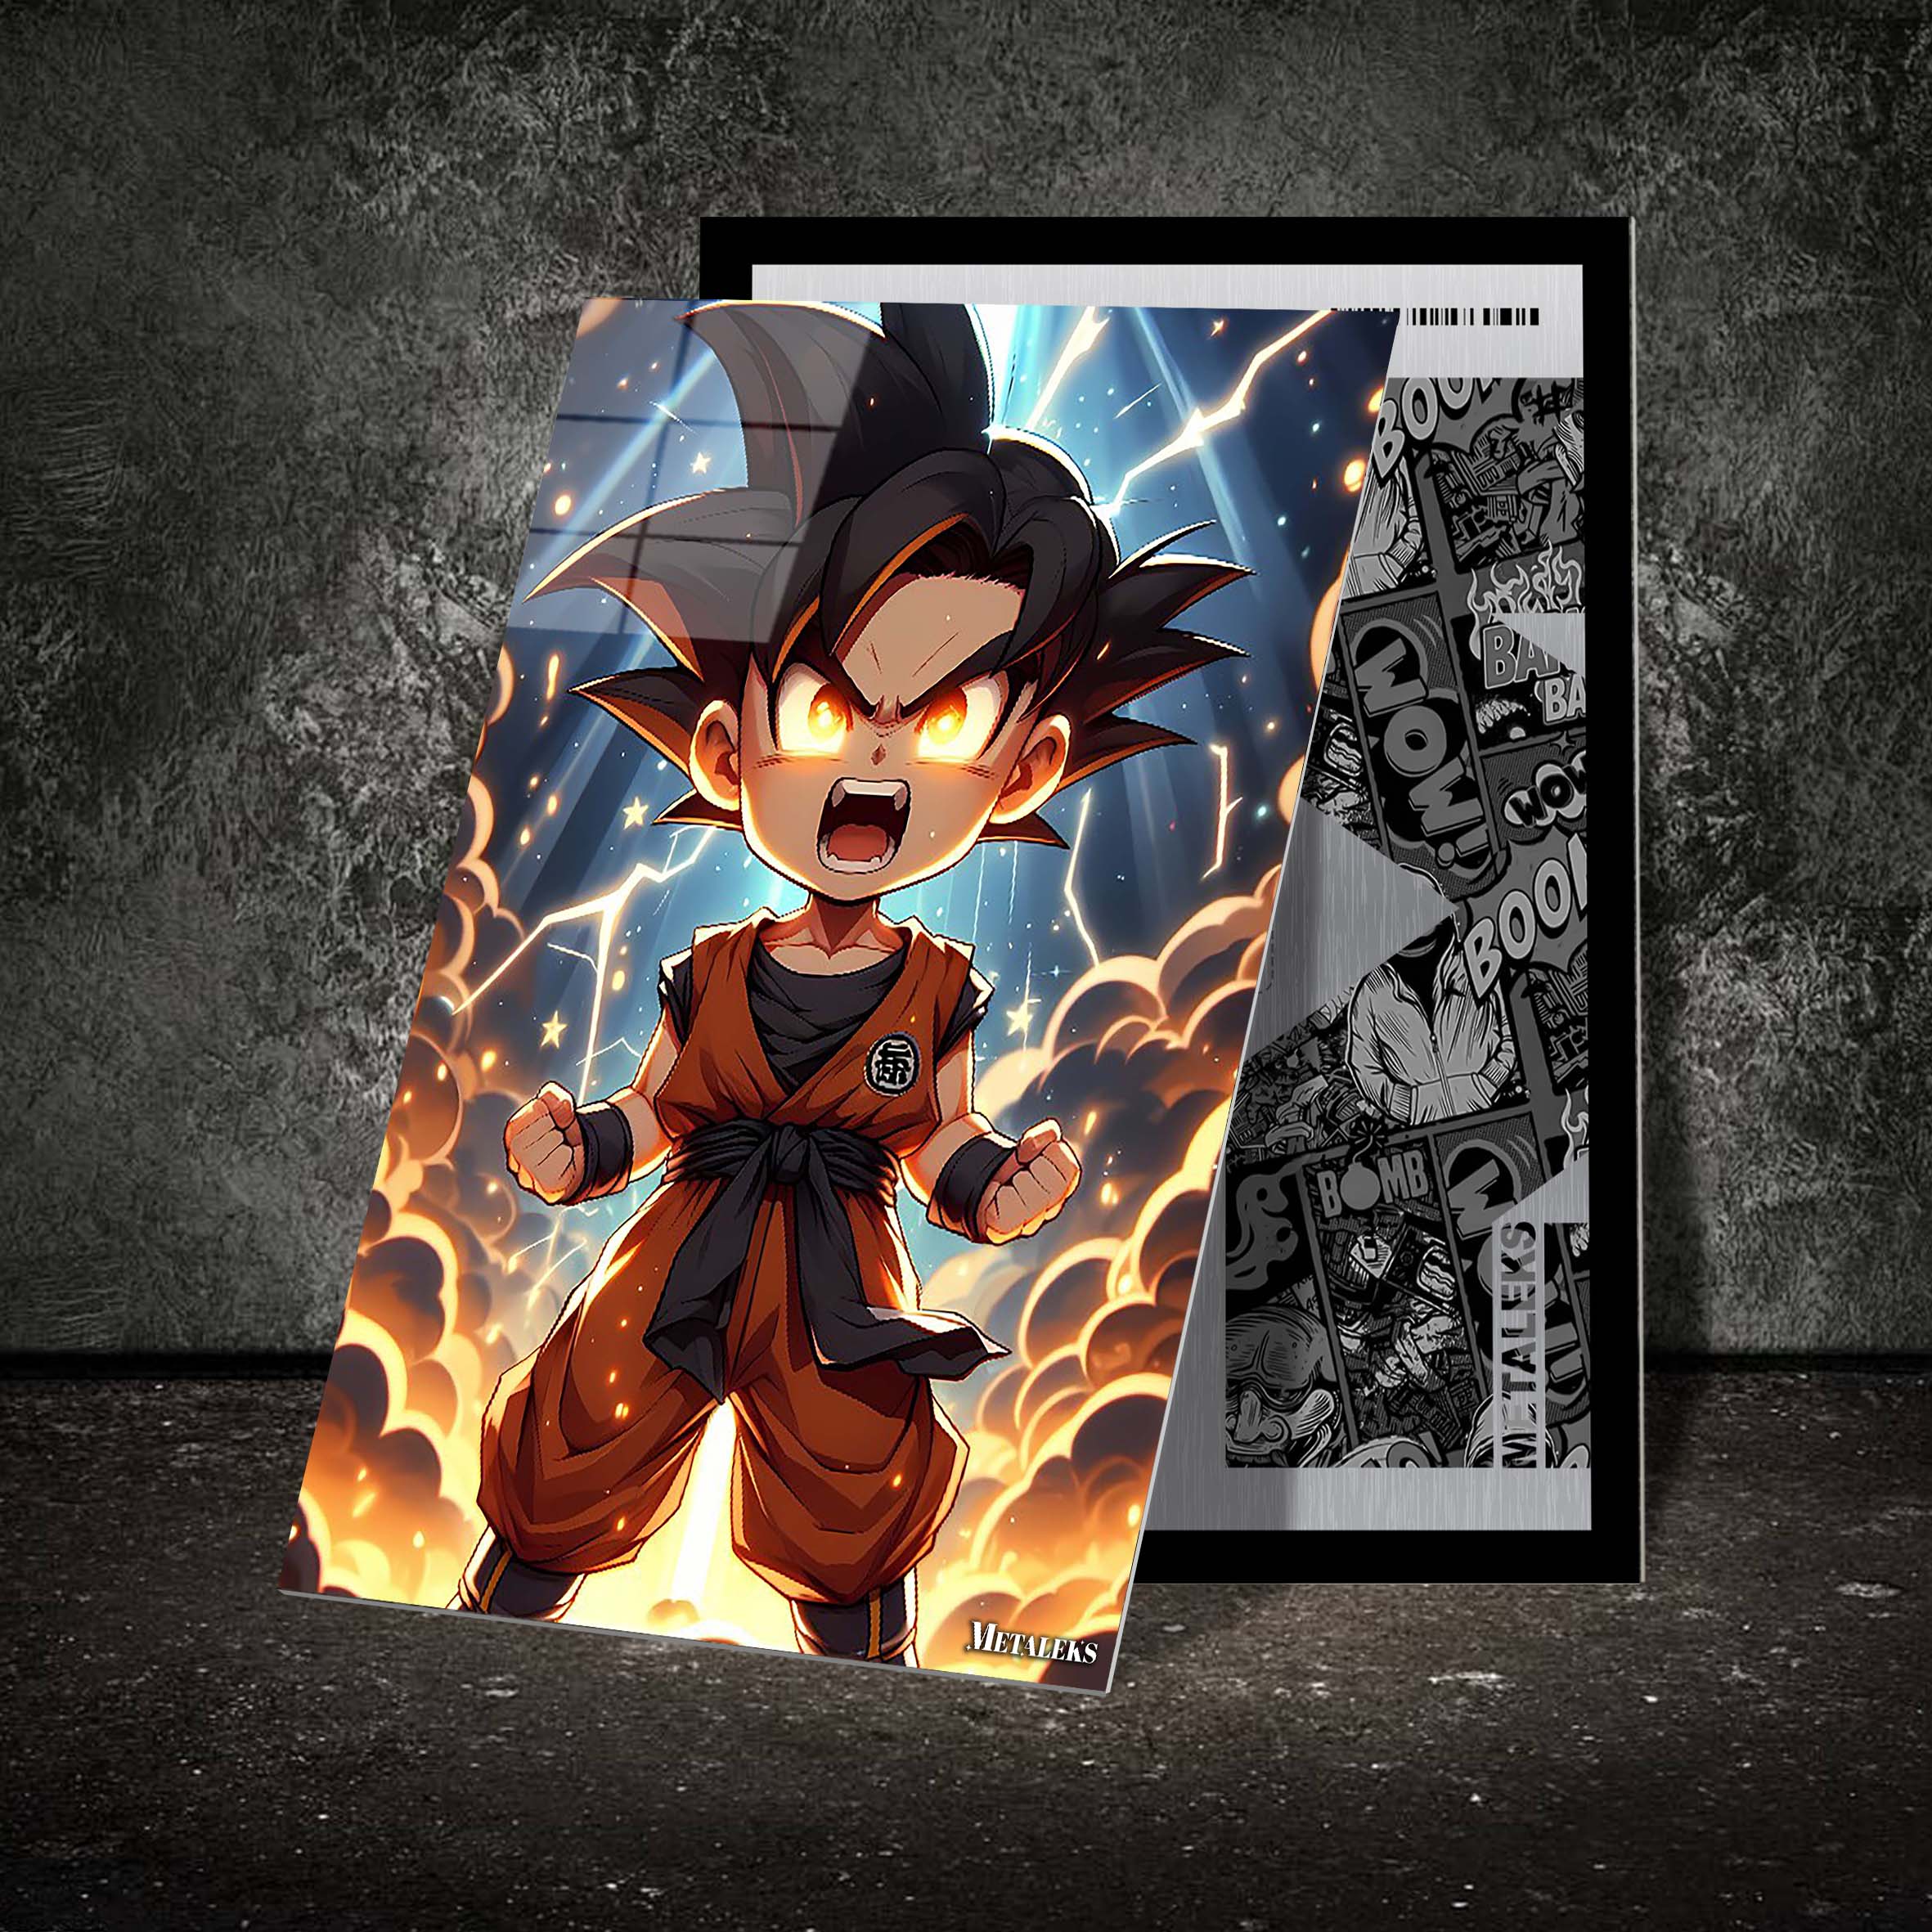 Goku the Ultimate Fighter-designed by @Lucifer Art2092